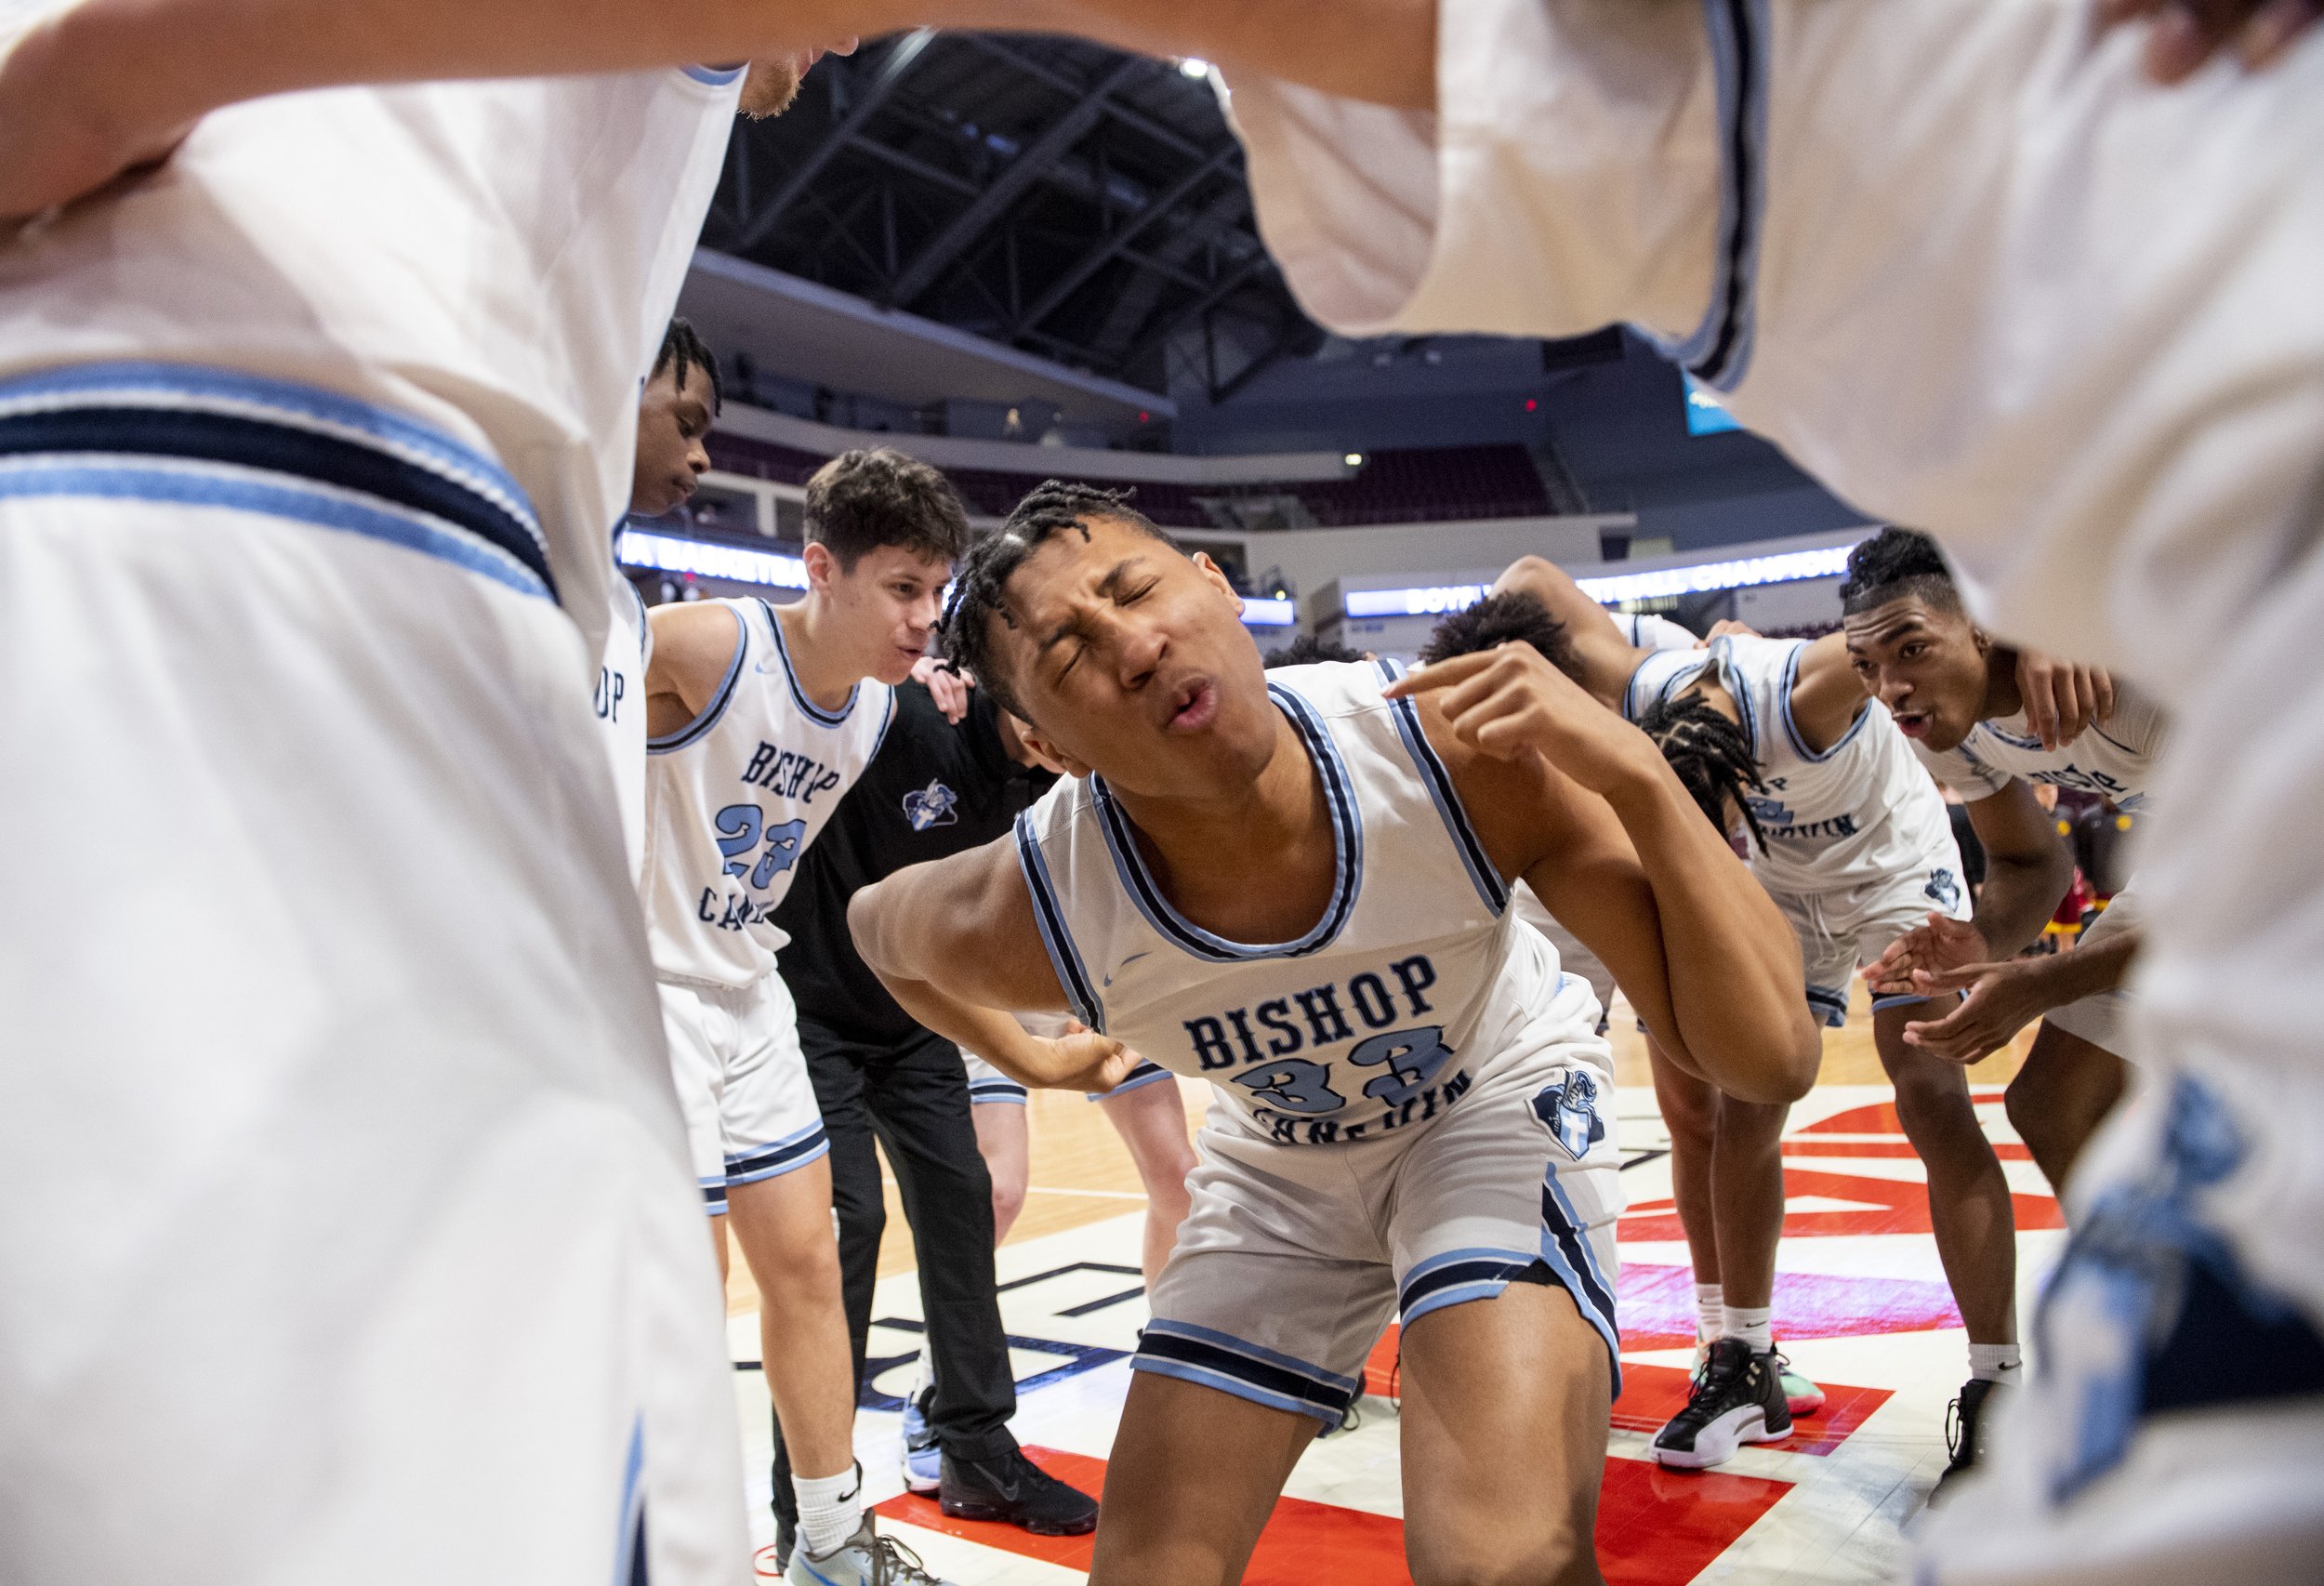  Bishop Canevin’s Ngai Avery, center, celebrates with his team after their 64-47 victory against St. John Neumann in the PIAA class 1A boys basketball championship on Thursday, March 24, 2022, at Giant Center in Hershey, Pa. (Emily Matthews/Post-Gaze